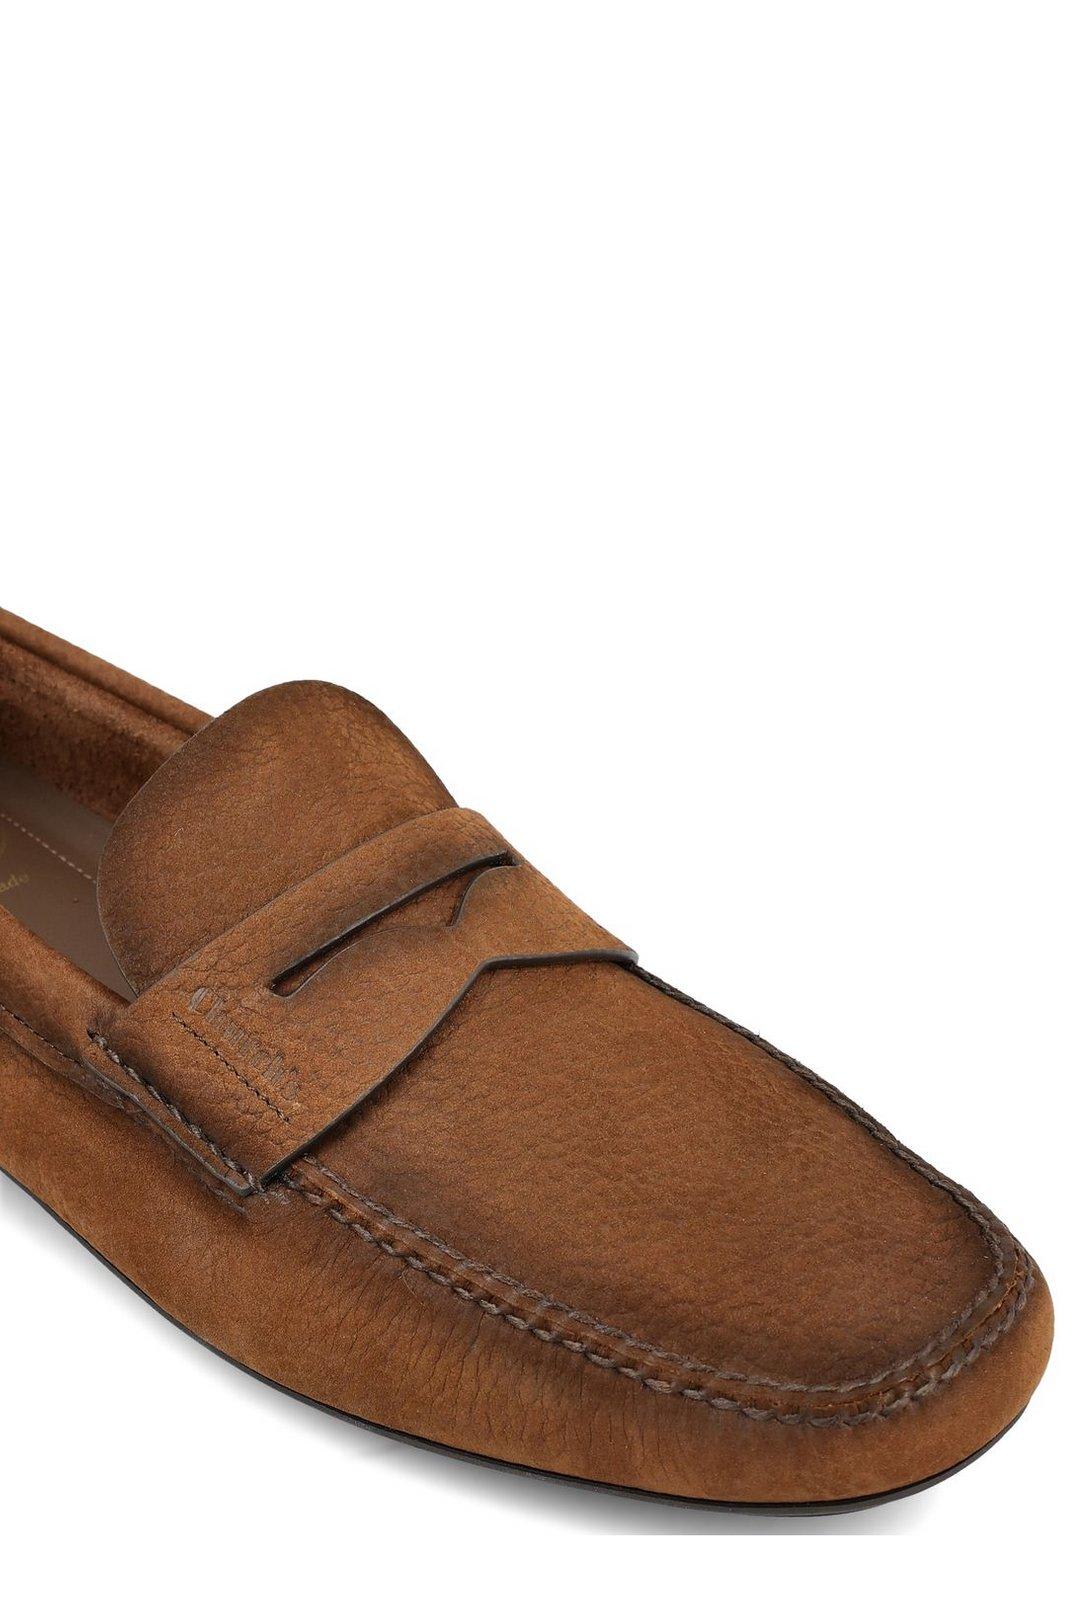 Shop Church's Round-toe Slip-on Loafers In Axo Burnt